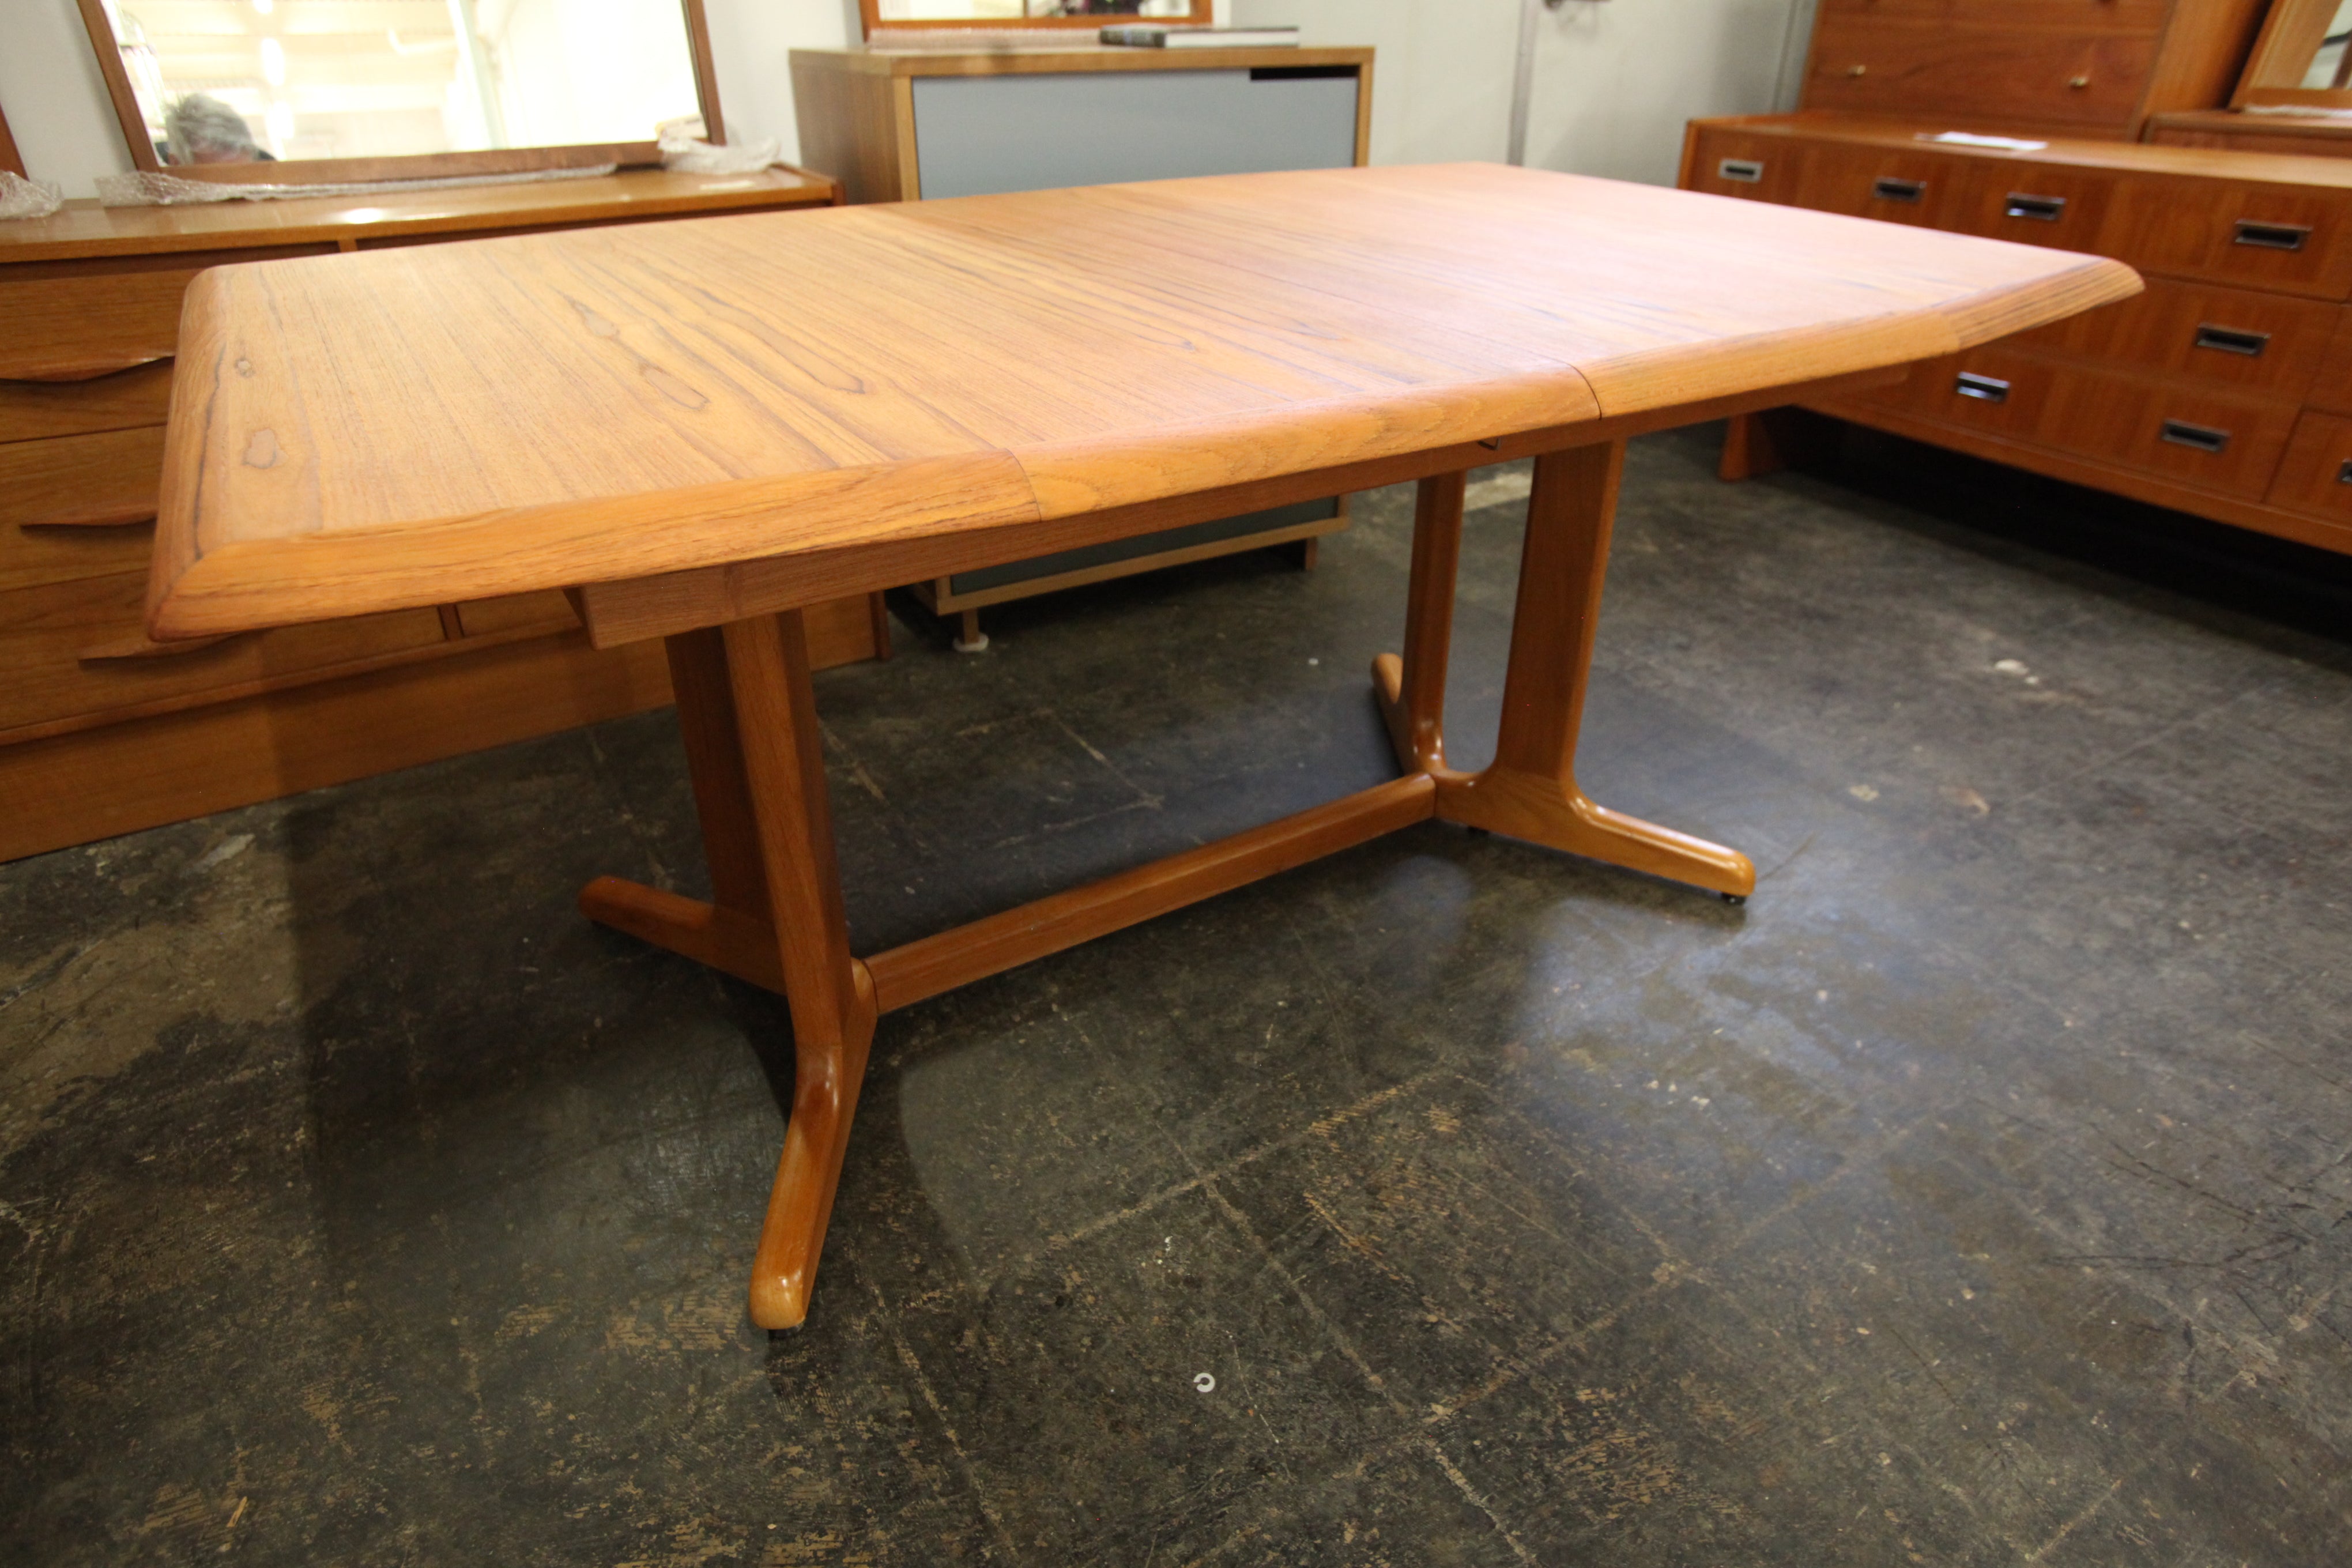 Beautiful Vintage Teak Dining Table w/ Two Leafs and Gear Assisted Opening